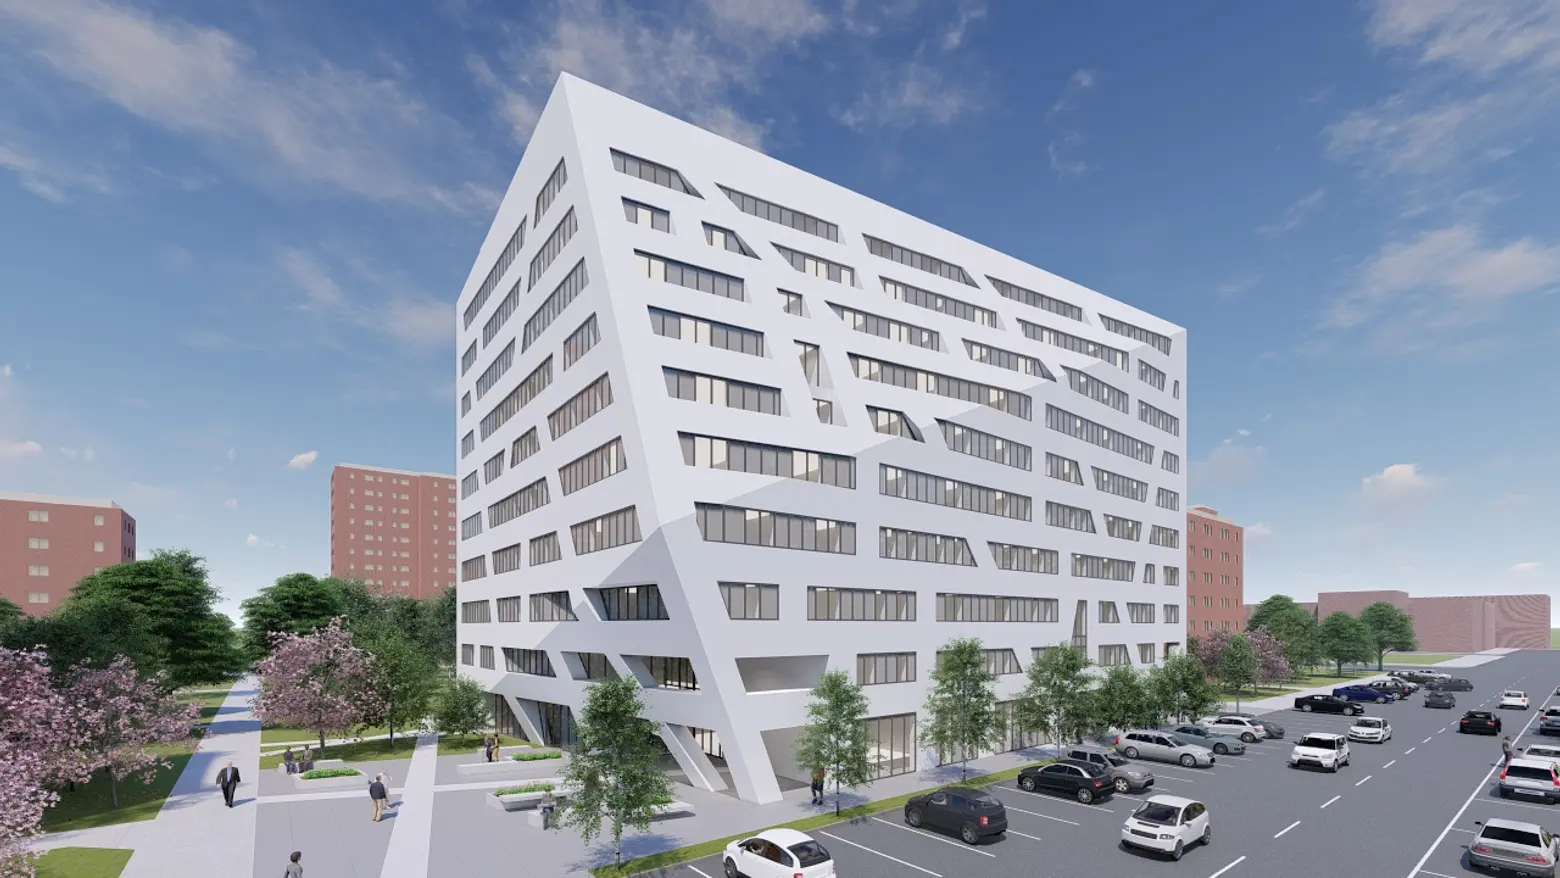 Construction to start on Daniel Libeskind’s affordable senior housing building in Bed-Stuy